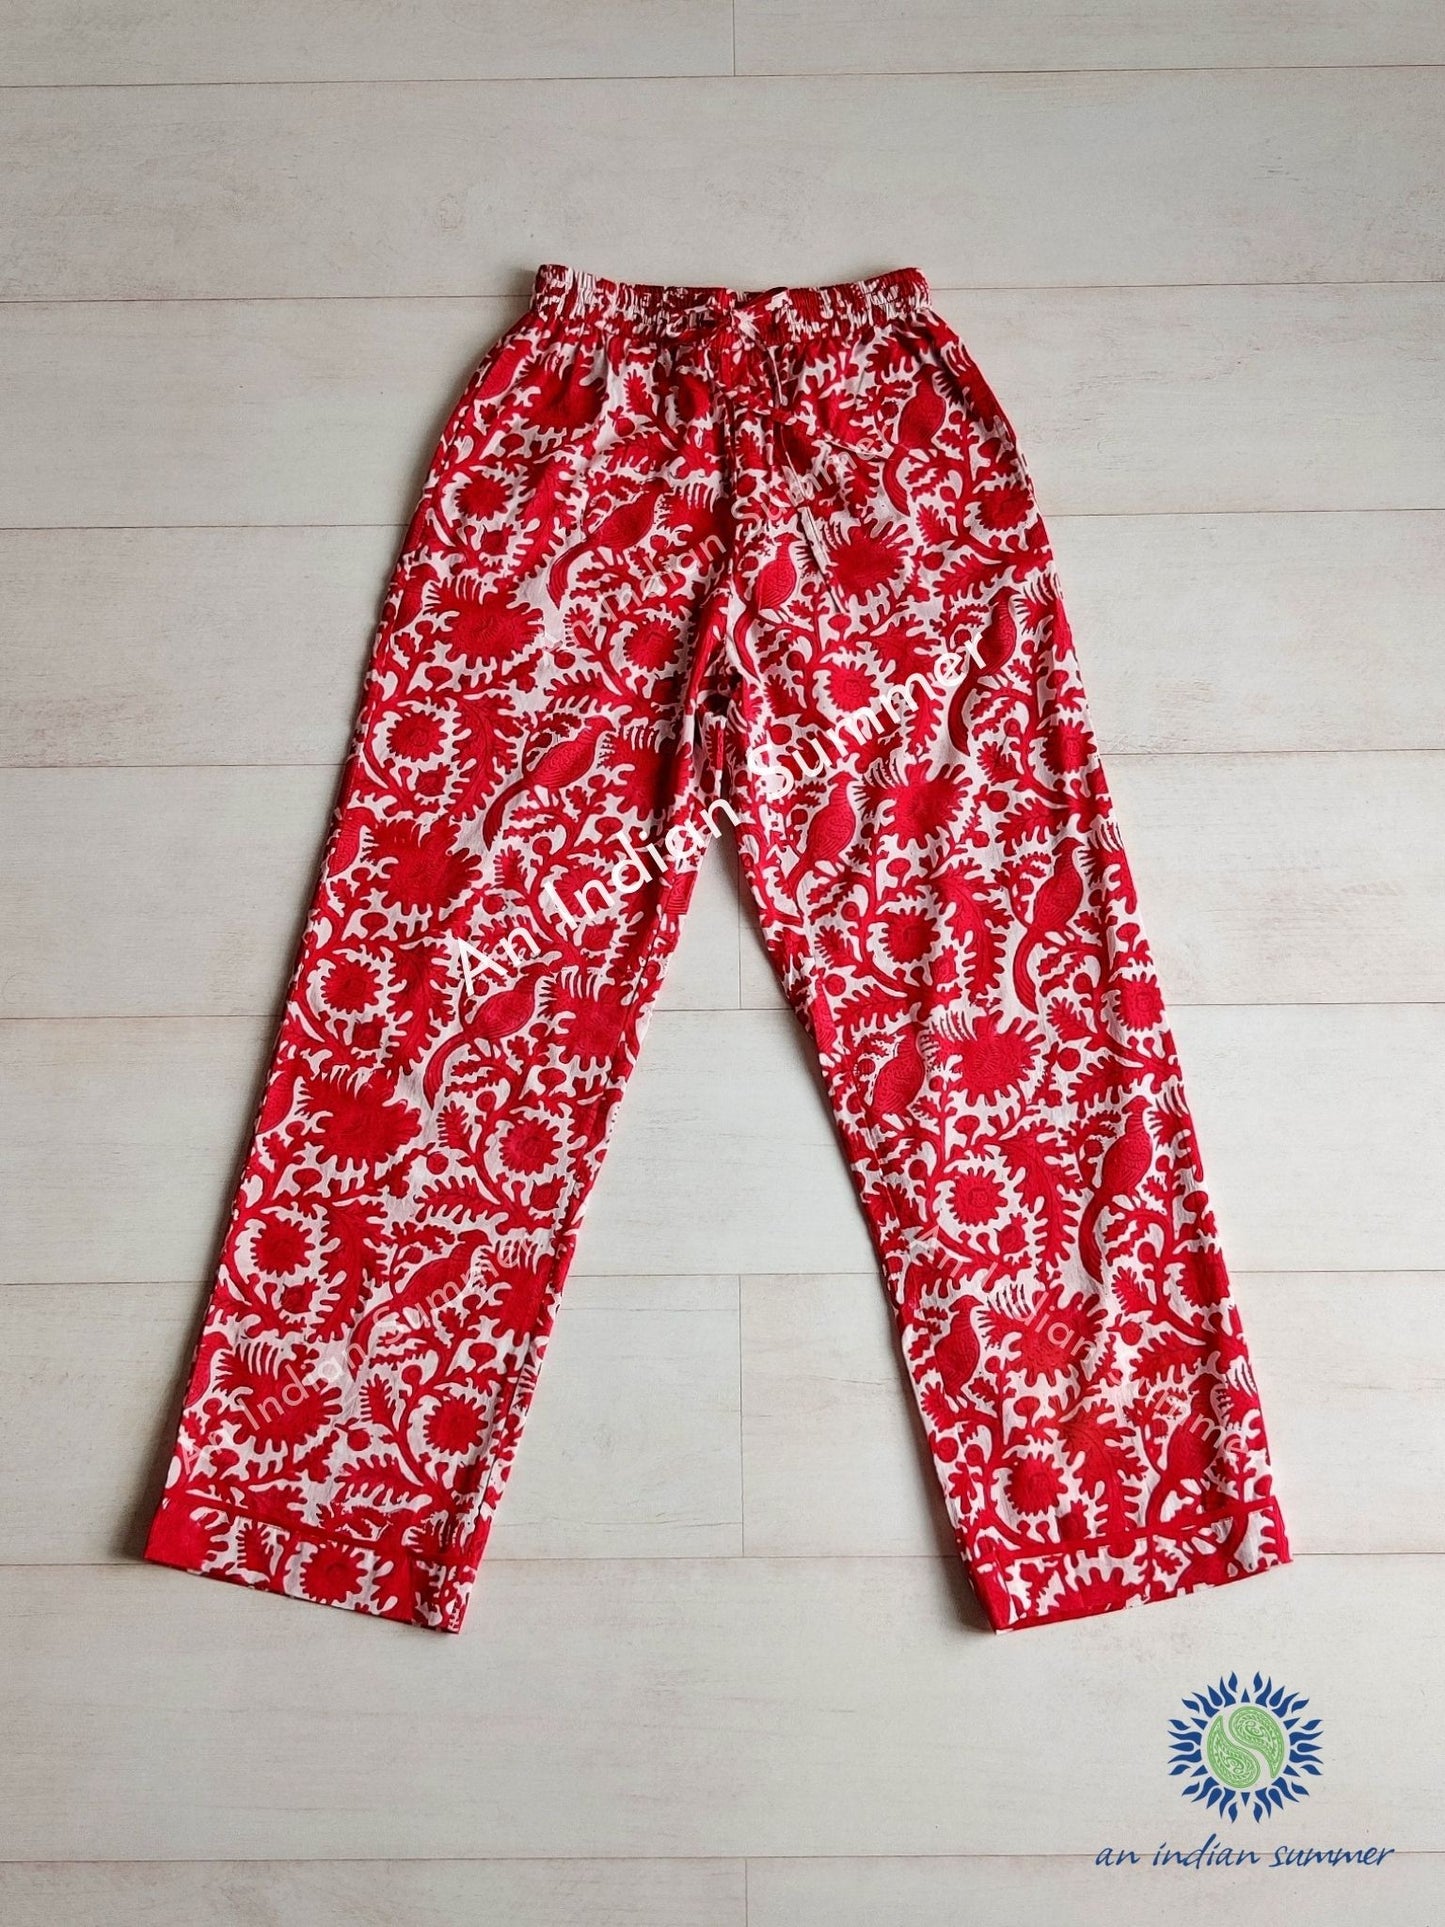 Lounge Set Birdsong Red | Short Kimono Robe & Lounge Pants | Hand Block Printed | Cotton | An Indian Summer | Seasonless Timeless Sustainable Ethical Authentic Artisan Conscious Clothing Lifestyle Brand